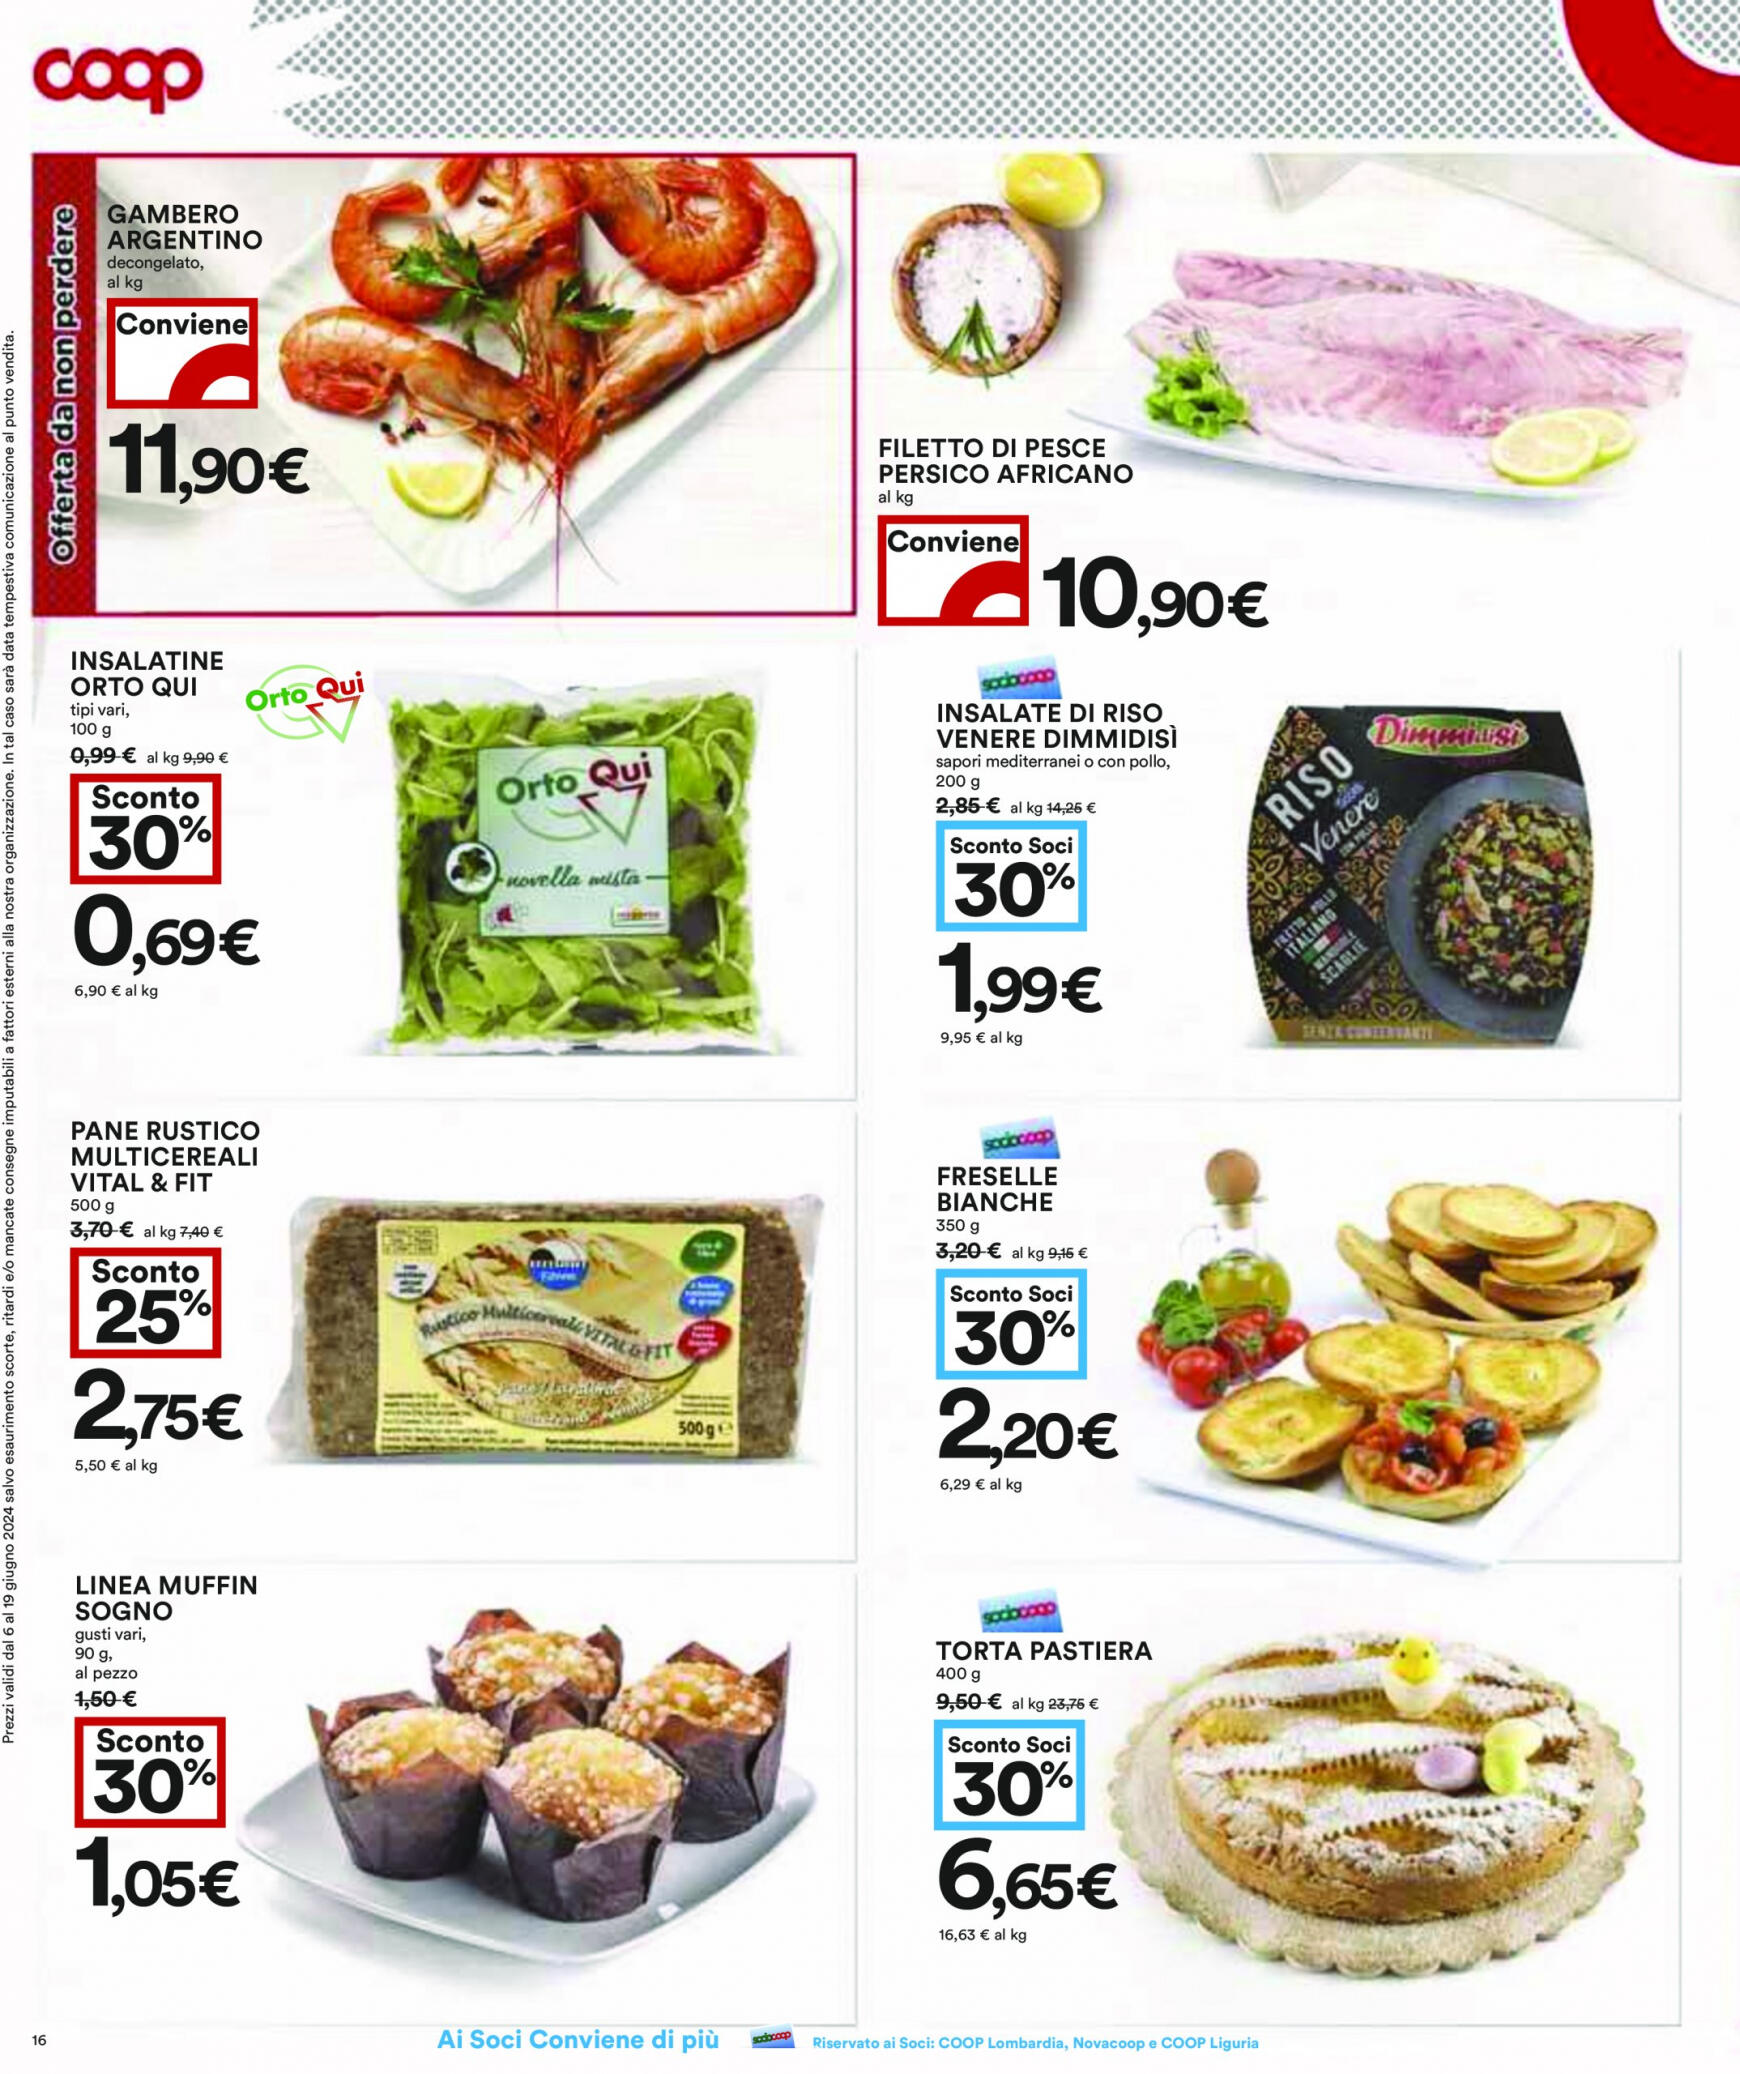 coop - Nuovo volantino Coop 10.06. - 19.06. - page: 16